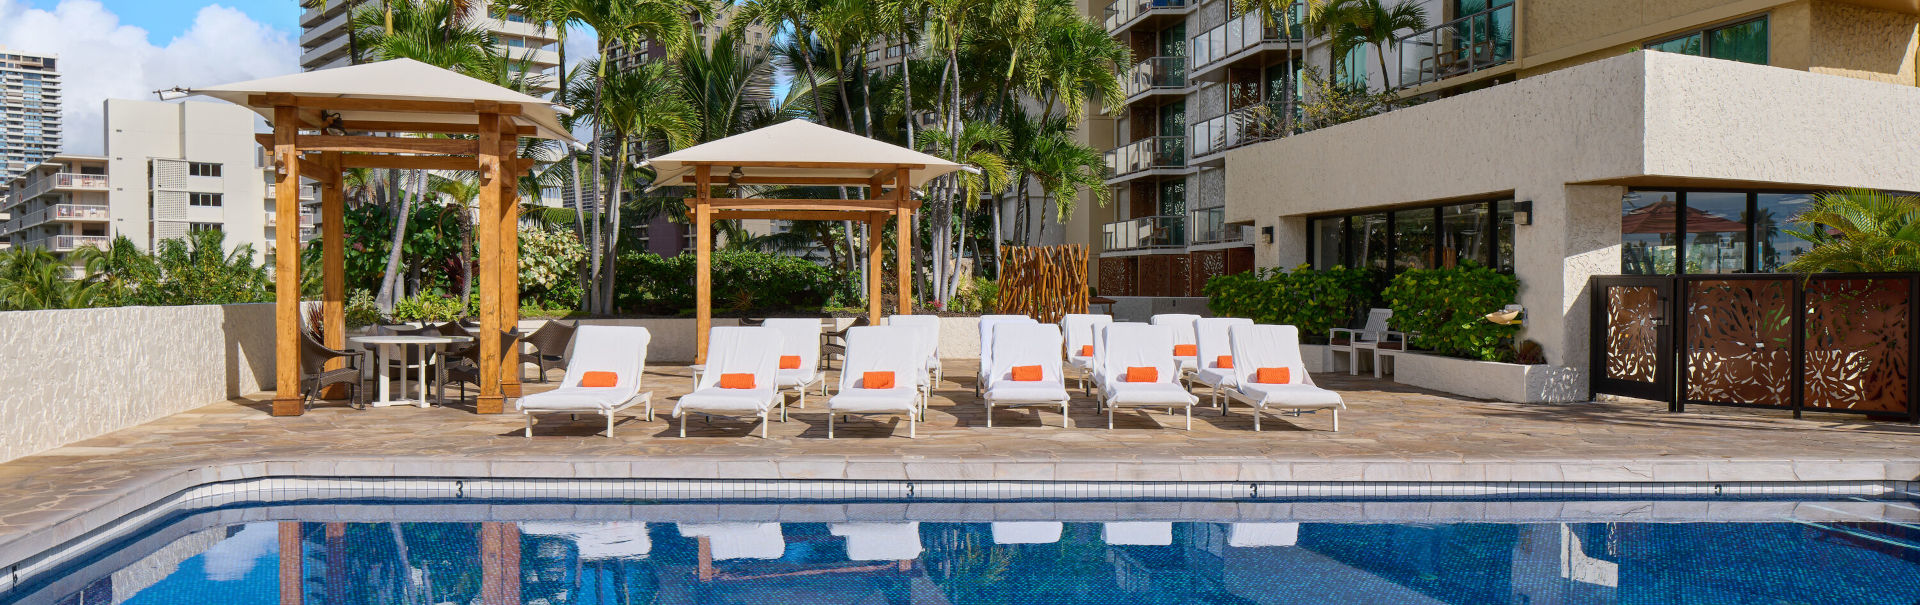 Pool and Sun Deck at Luana Waikiki Hotel and Suites